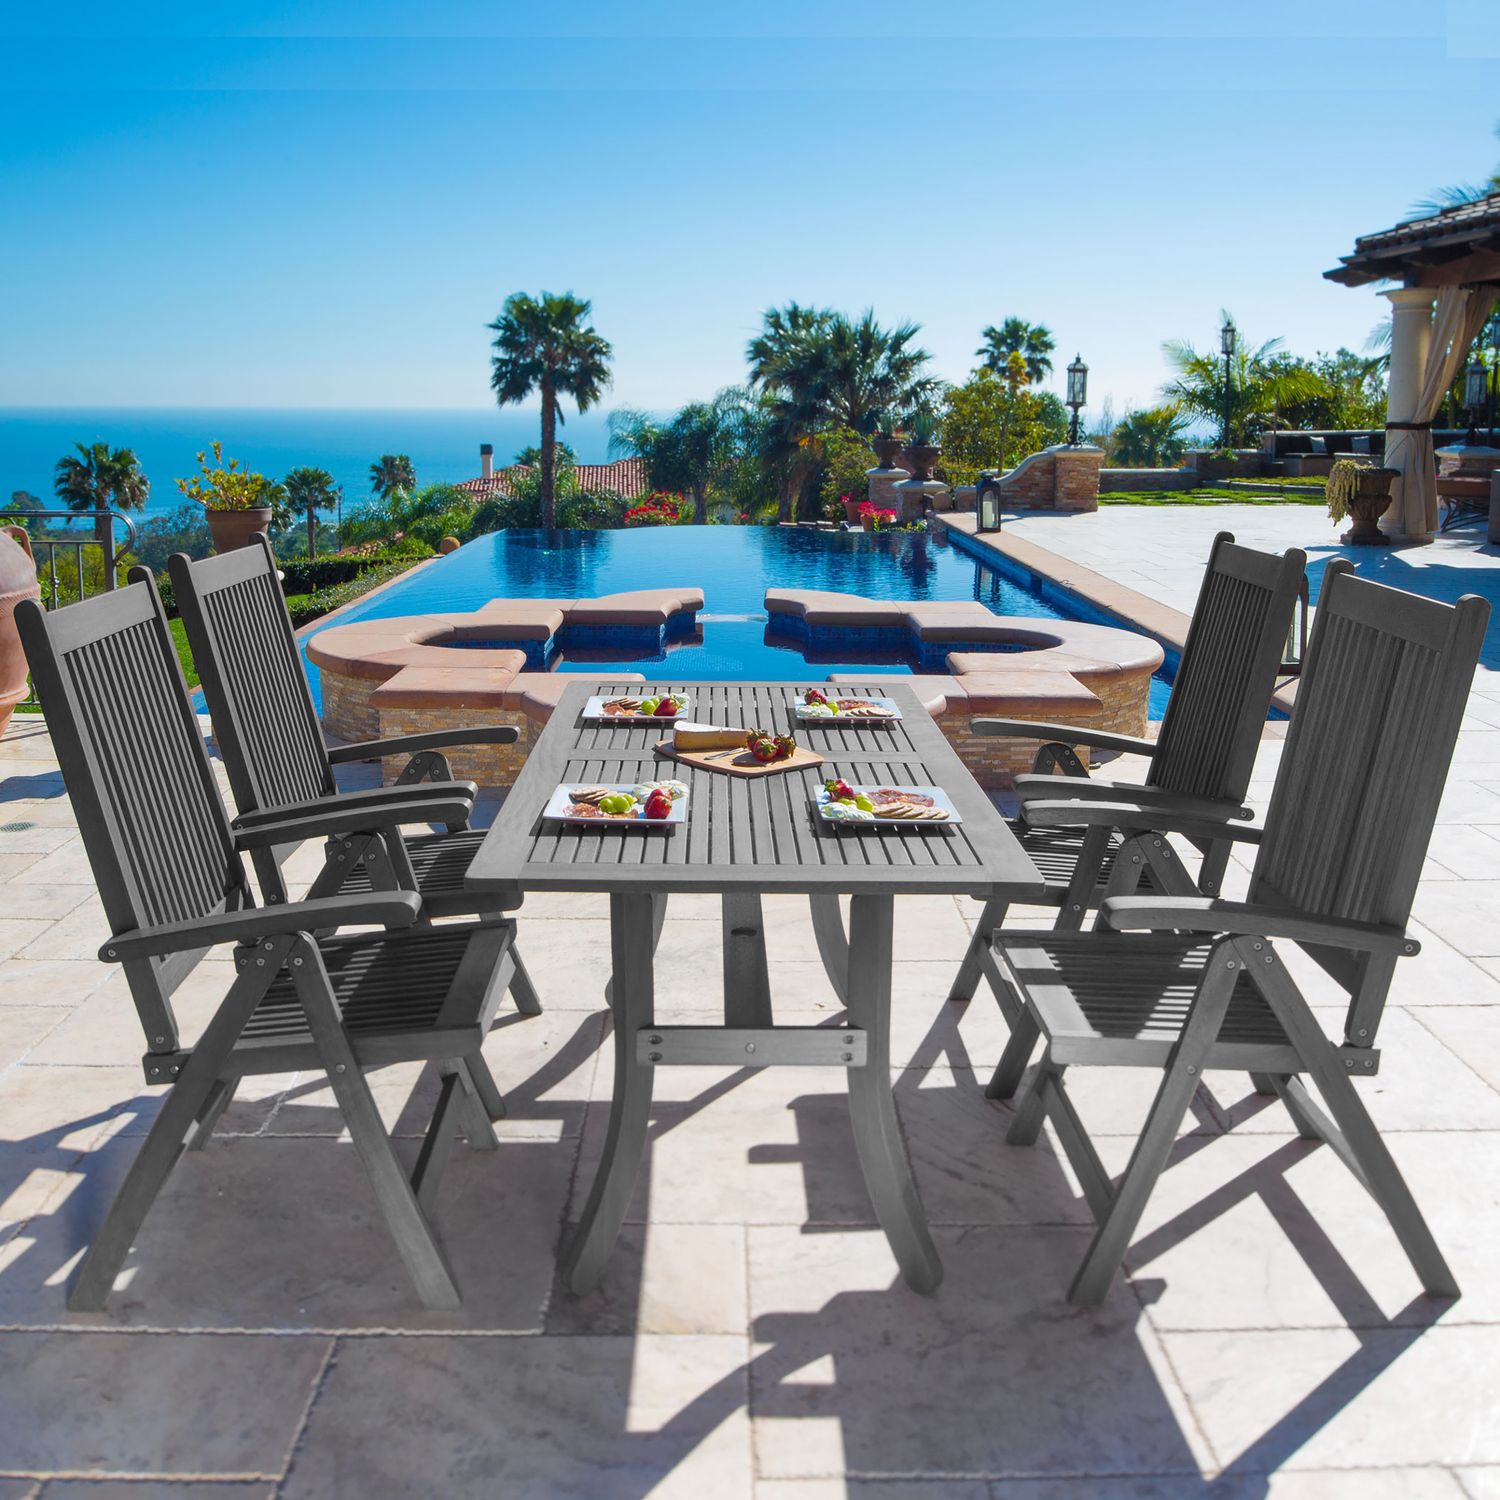 Renaissance Outdoor Patio Hand-scraped Wood 5-piece Dining Set with Reclining Chairs